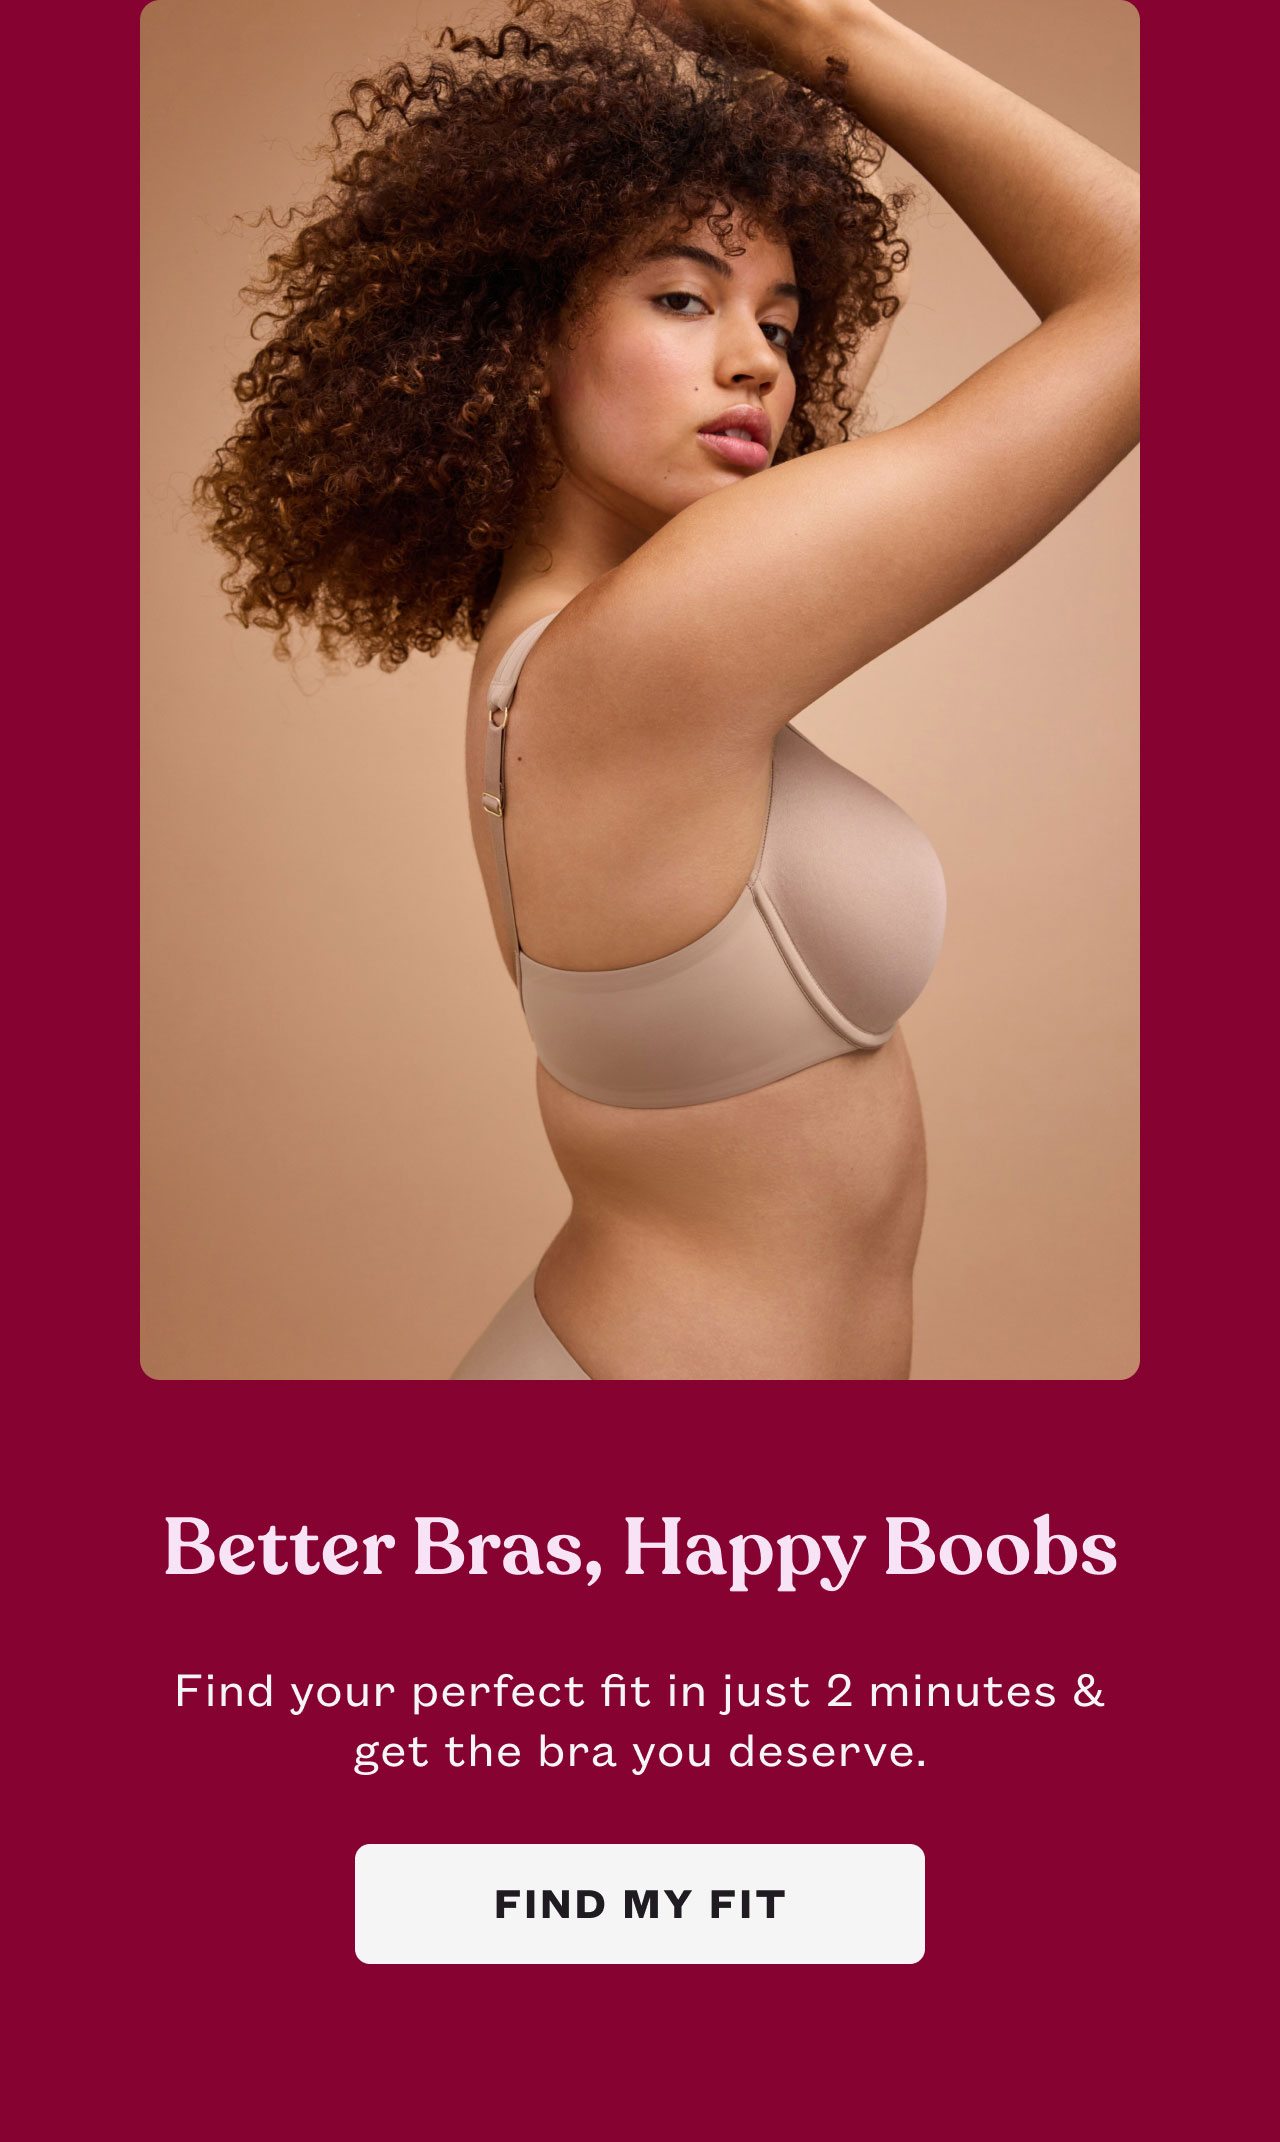 Better Bras, Happy Boobs. Find your perfect fit in just 2 minutes & get the bra you deserve. FIND MY FIT